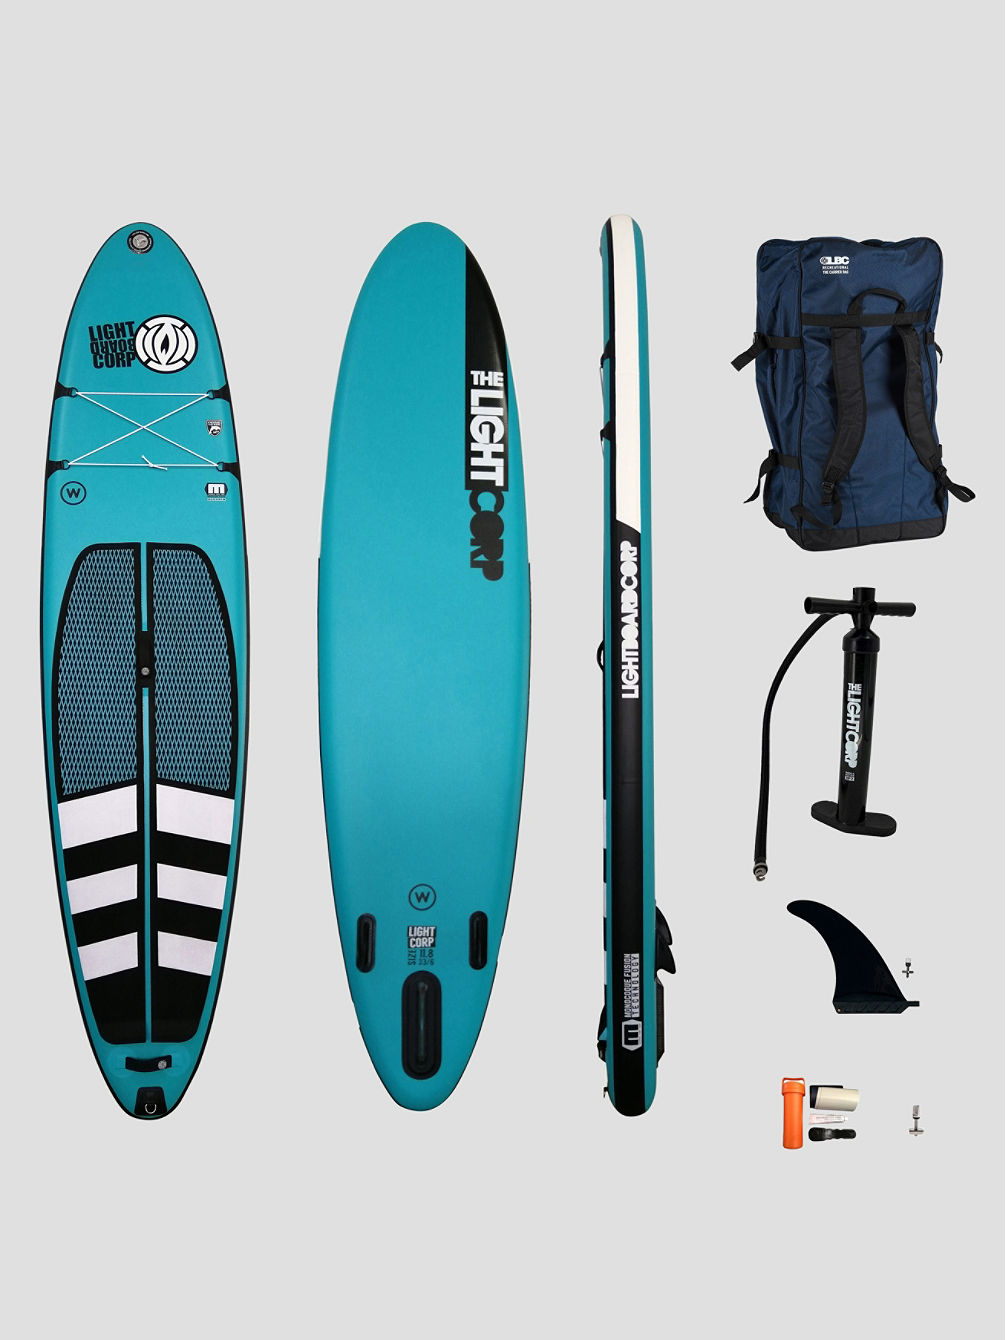 The Blue Series Freeride Wide 11&amp;#039;8 Planche SUP